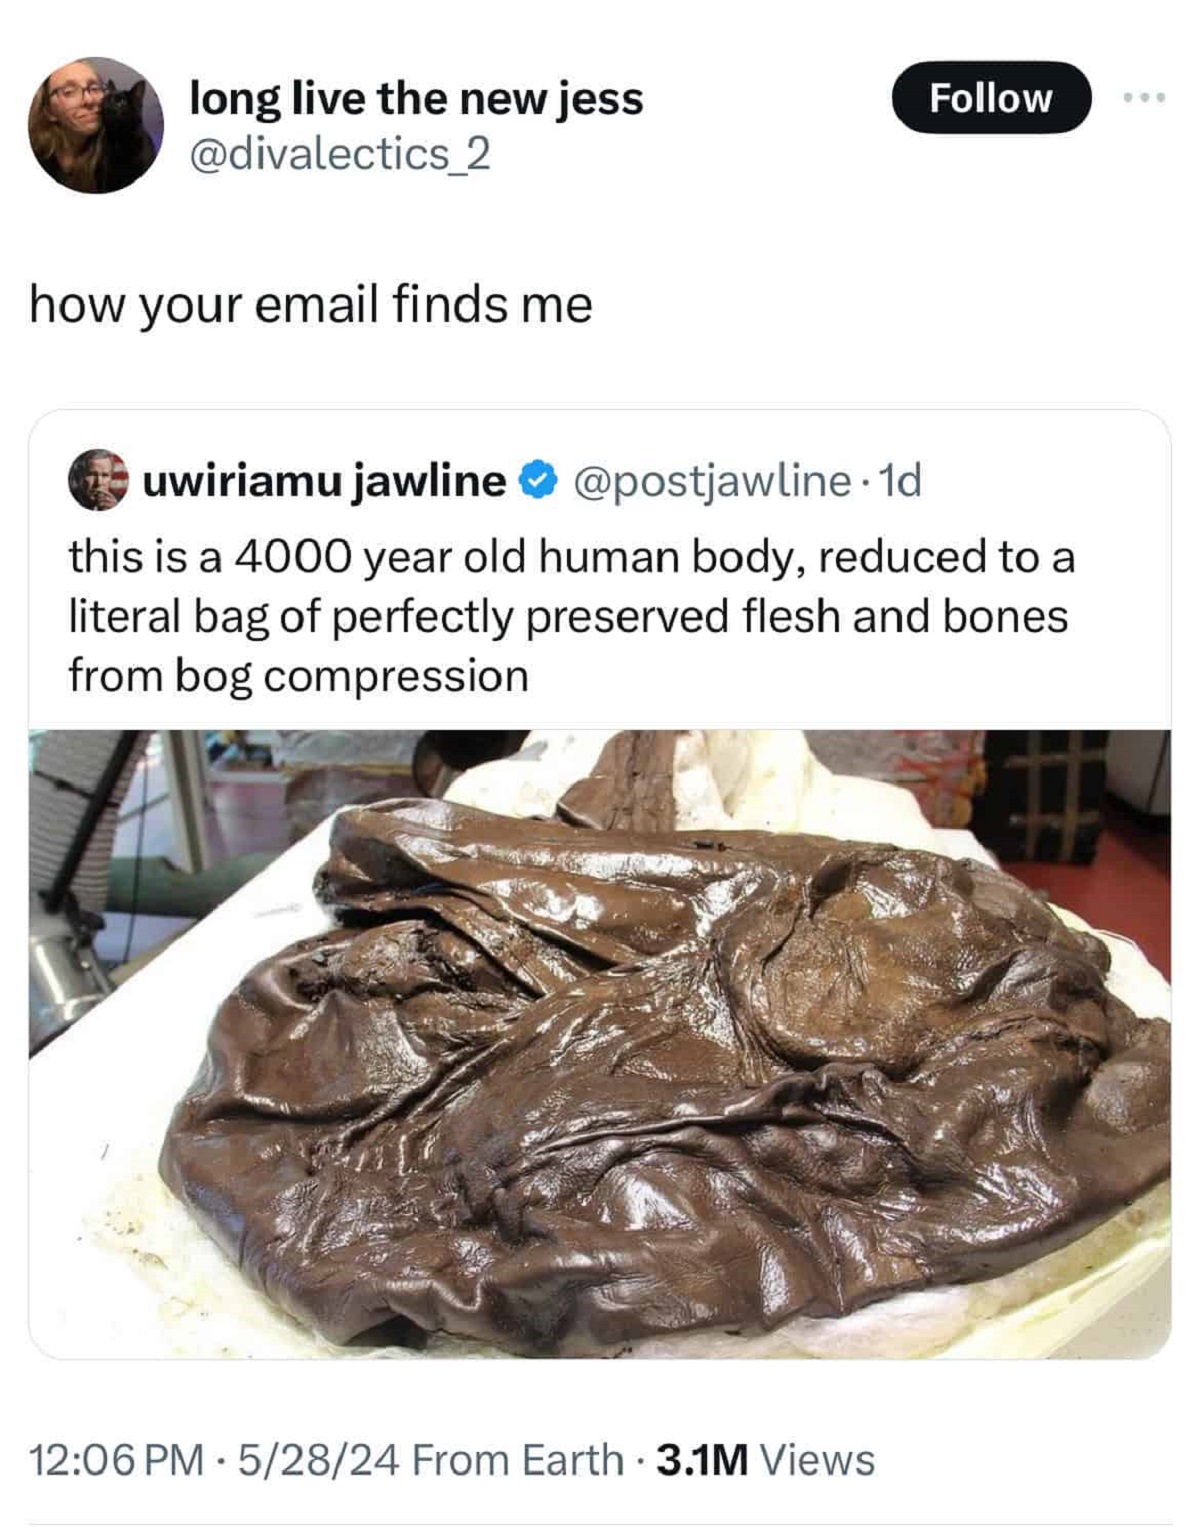 long live the new jess how your email finds me uwiriamu jawline . 1d this is a 4000 year old human body, reduced to a literal bag of perfectly preserved flesh and bones from bog compression # 52824 From Earth 3.1M Views